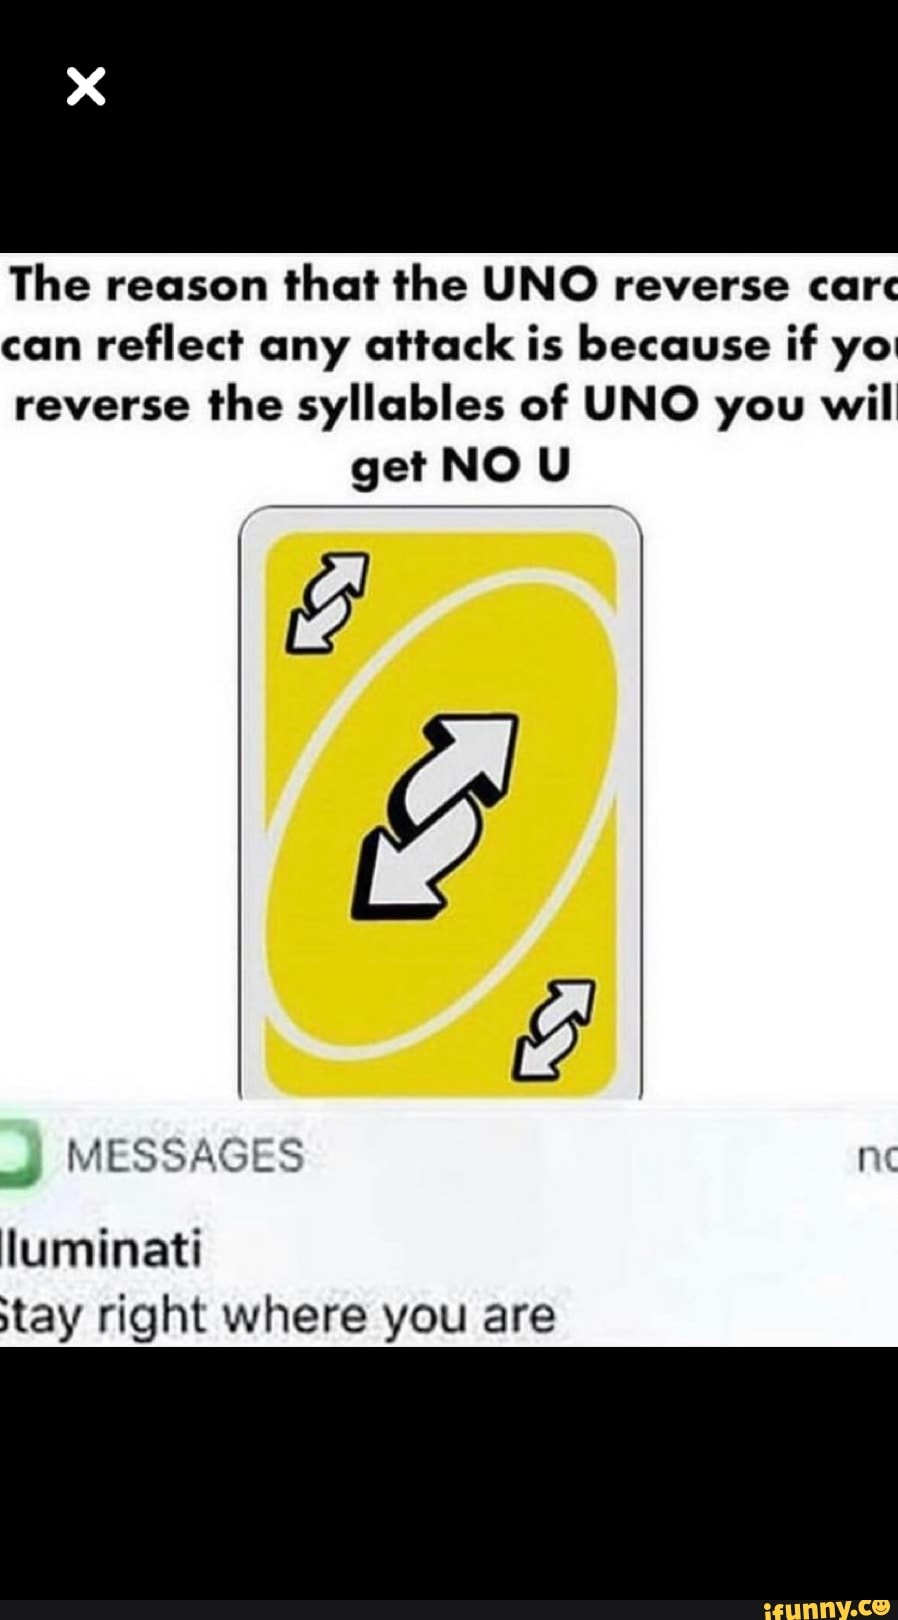 The Reason That The Uno Reverse Care Can Reflect Any Attack Is